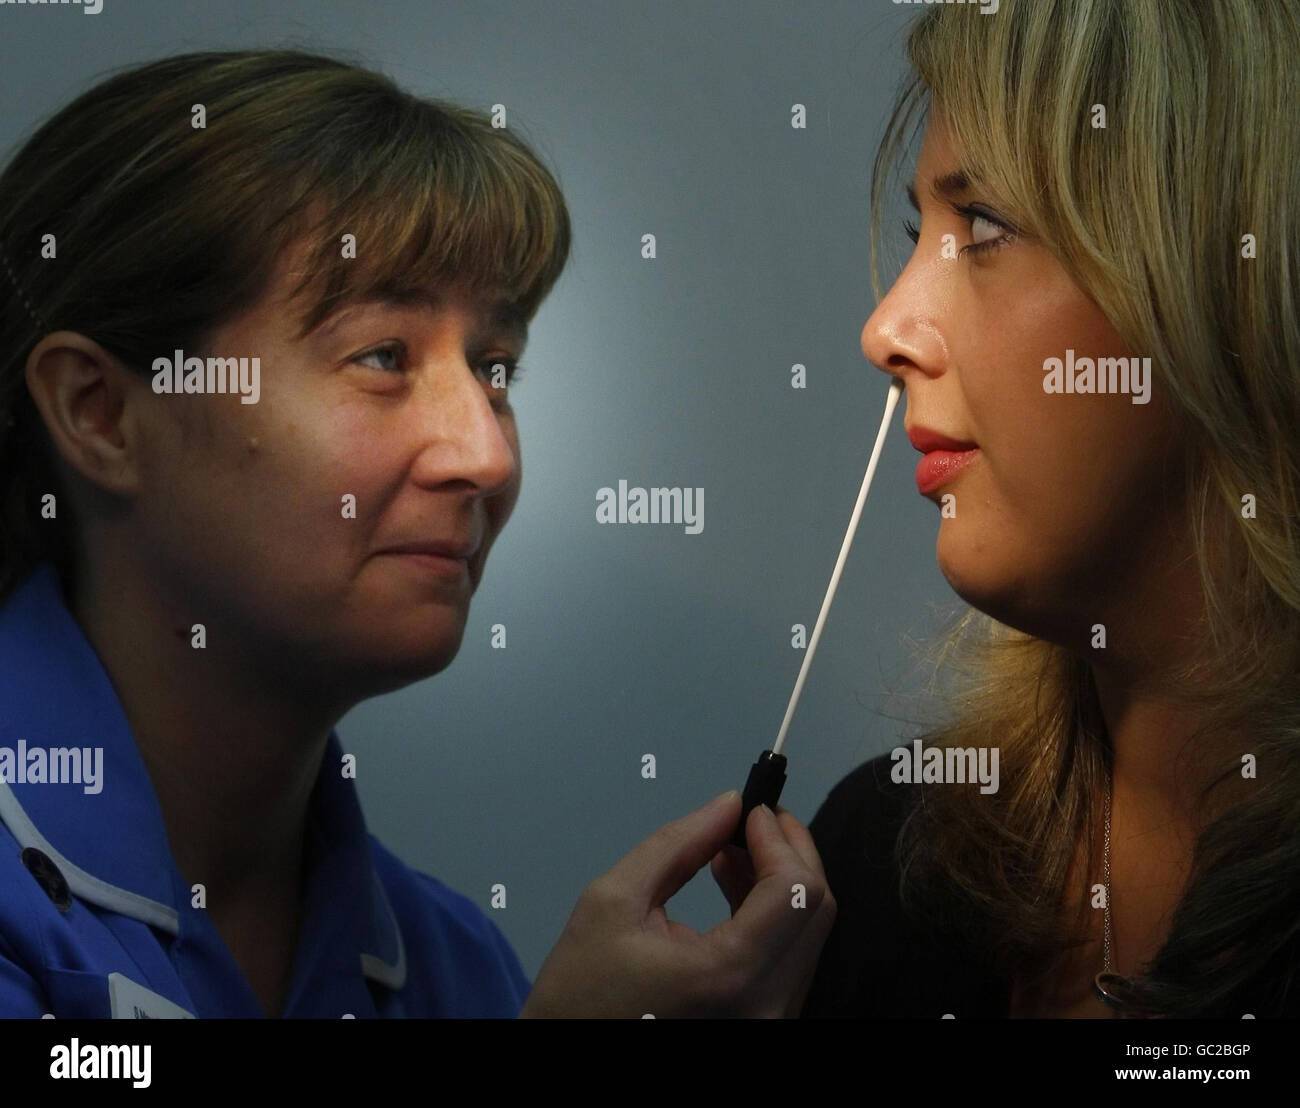 PICTURE POSED BY MODEL. Staff Nurse Samantha Mountford takes a nasal swab from Emma Gregory at the Royal Alexandra Hospital in Paisley, to demonstrate a new MRSA screening program. Stock Photo